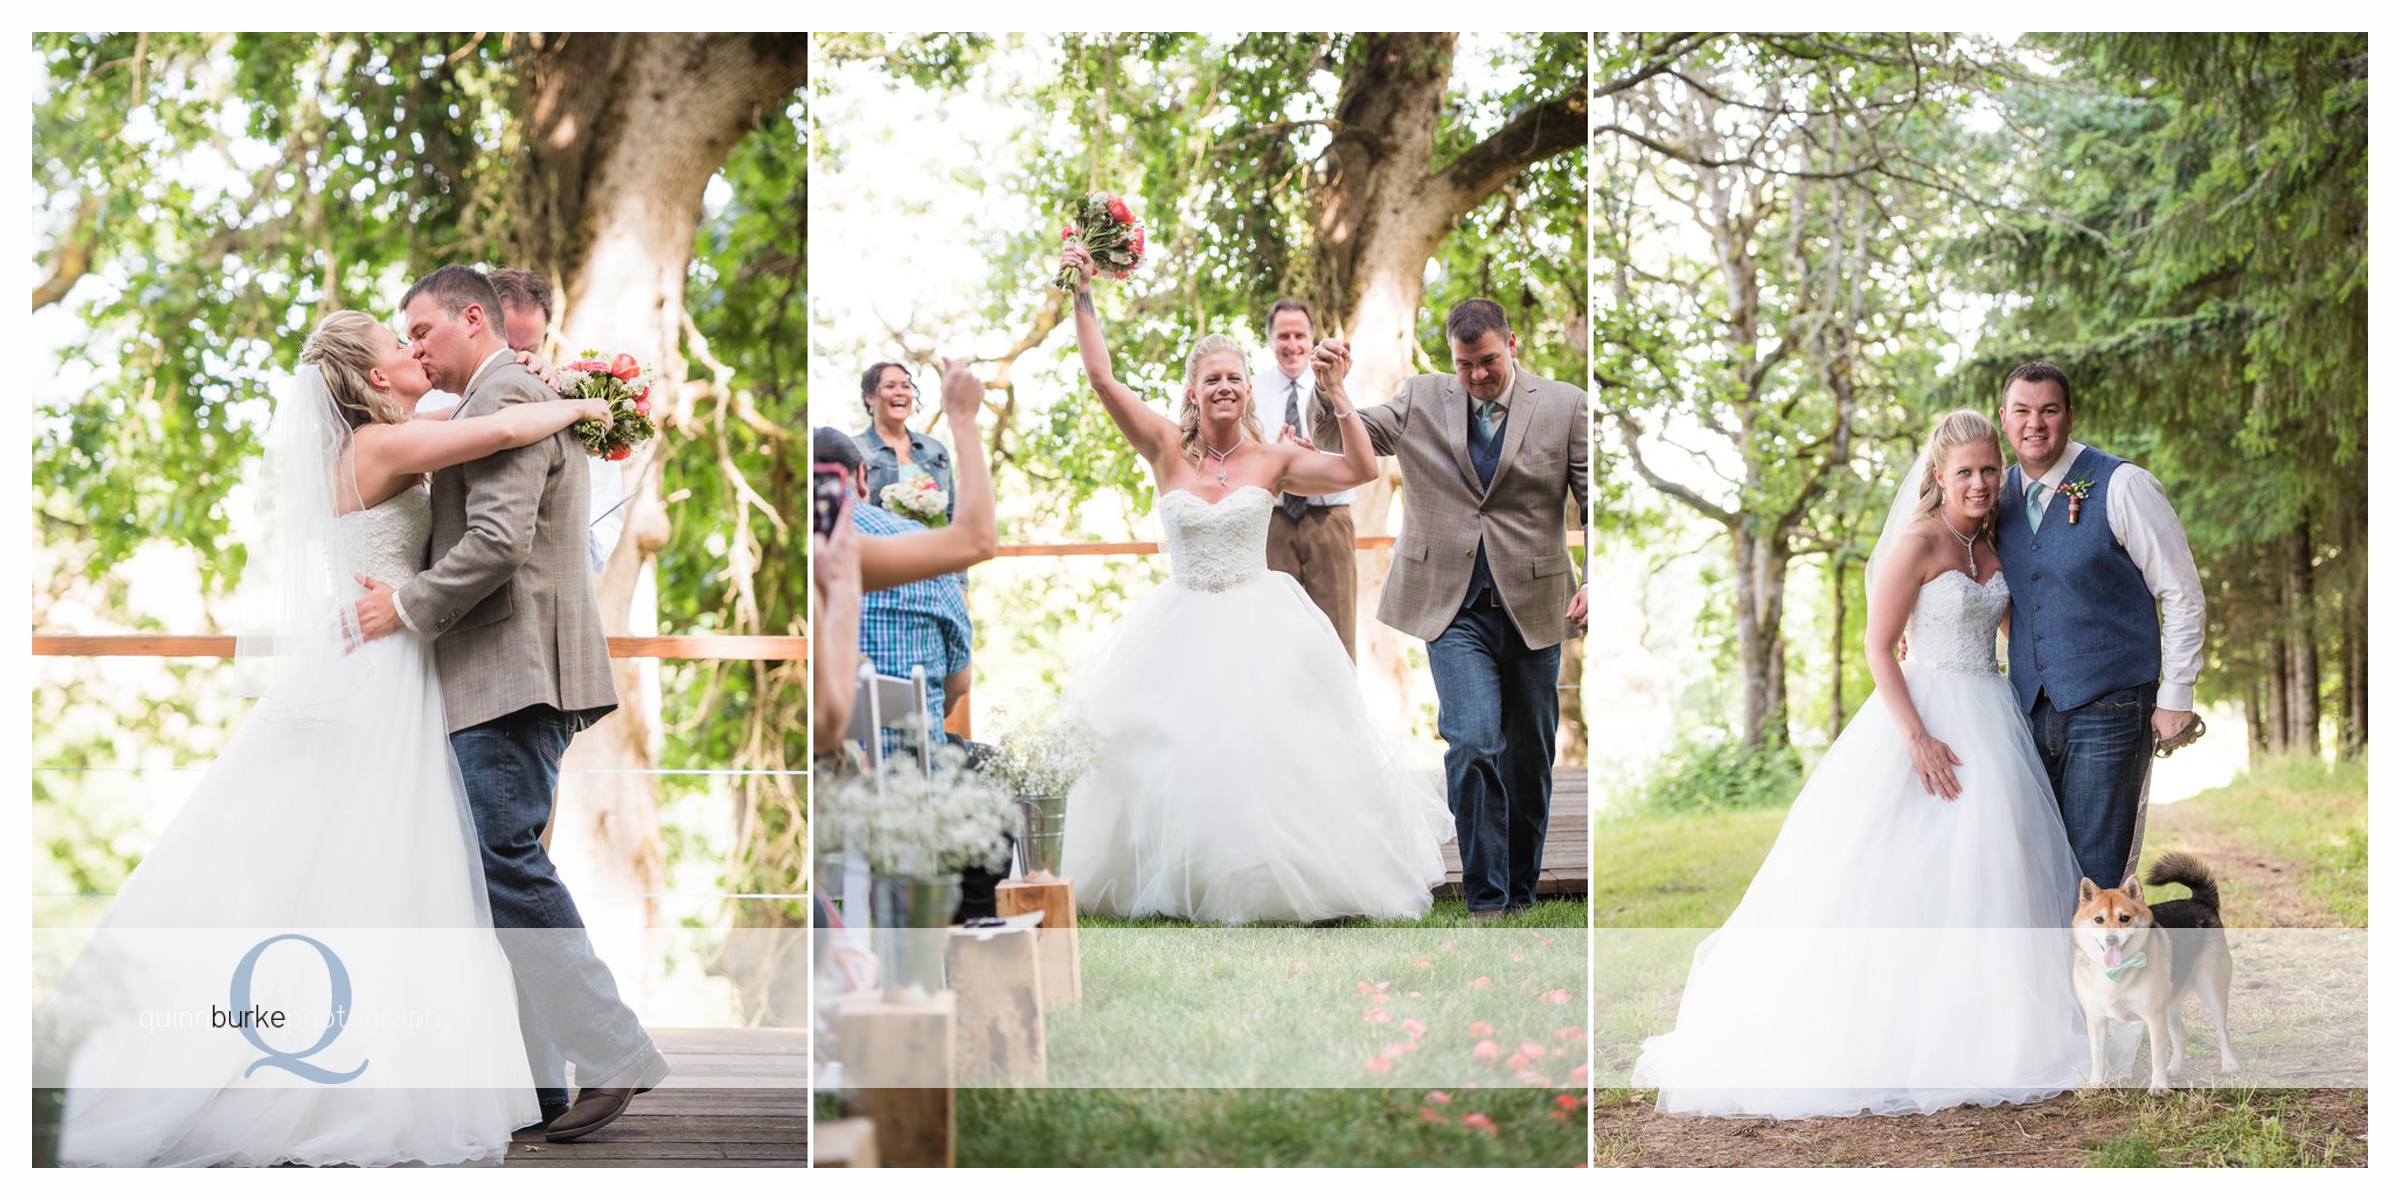 just married at perryhill farm wedding